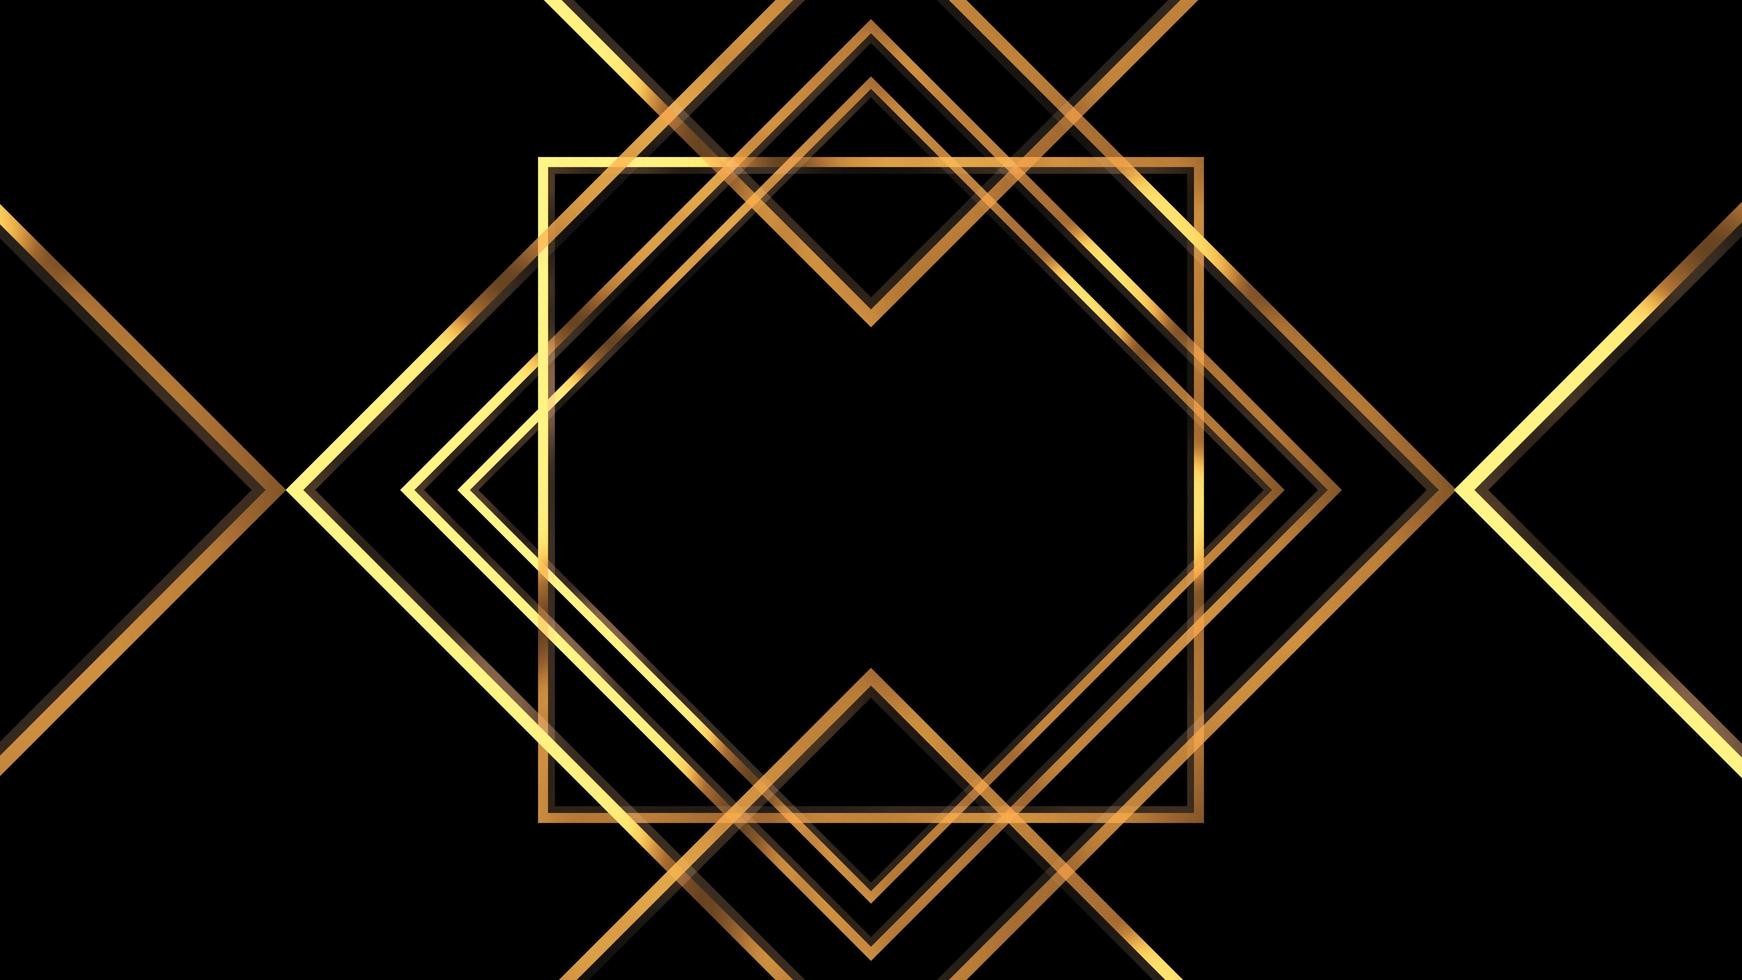 20s Retro style. Abstract Art deco style Linear Geometric gold pattern 1920s Vintage background. photo